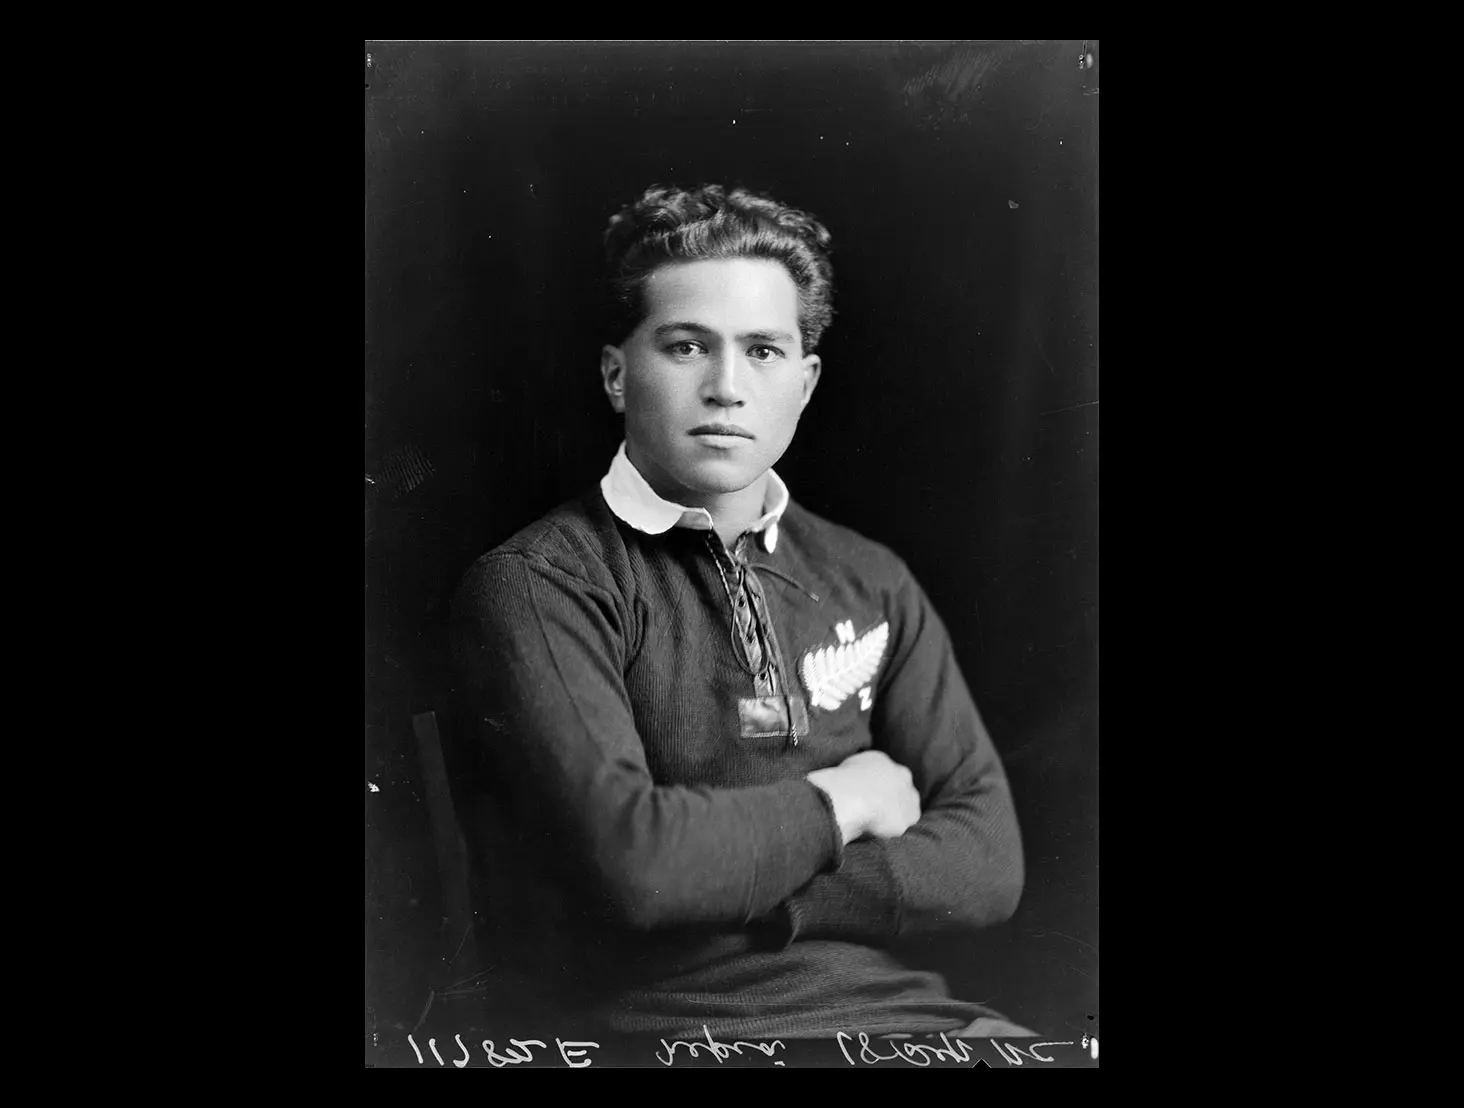 Studio back-and-white photo of George Nēpia, wearing an All Blacks uniform, with arms crossed looking at the camera.